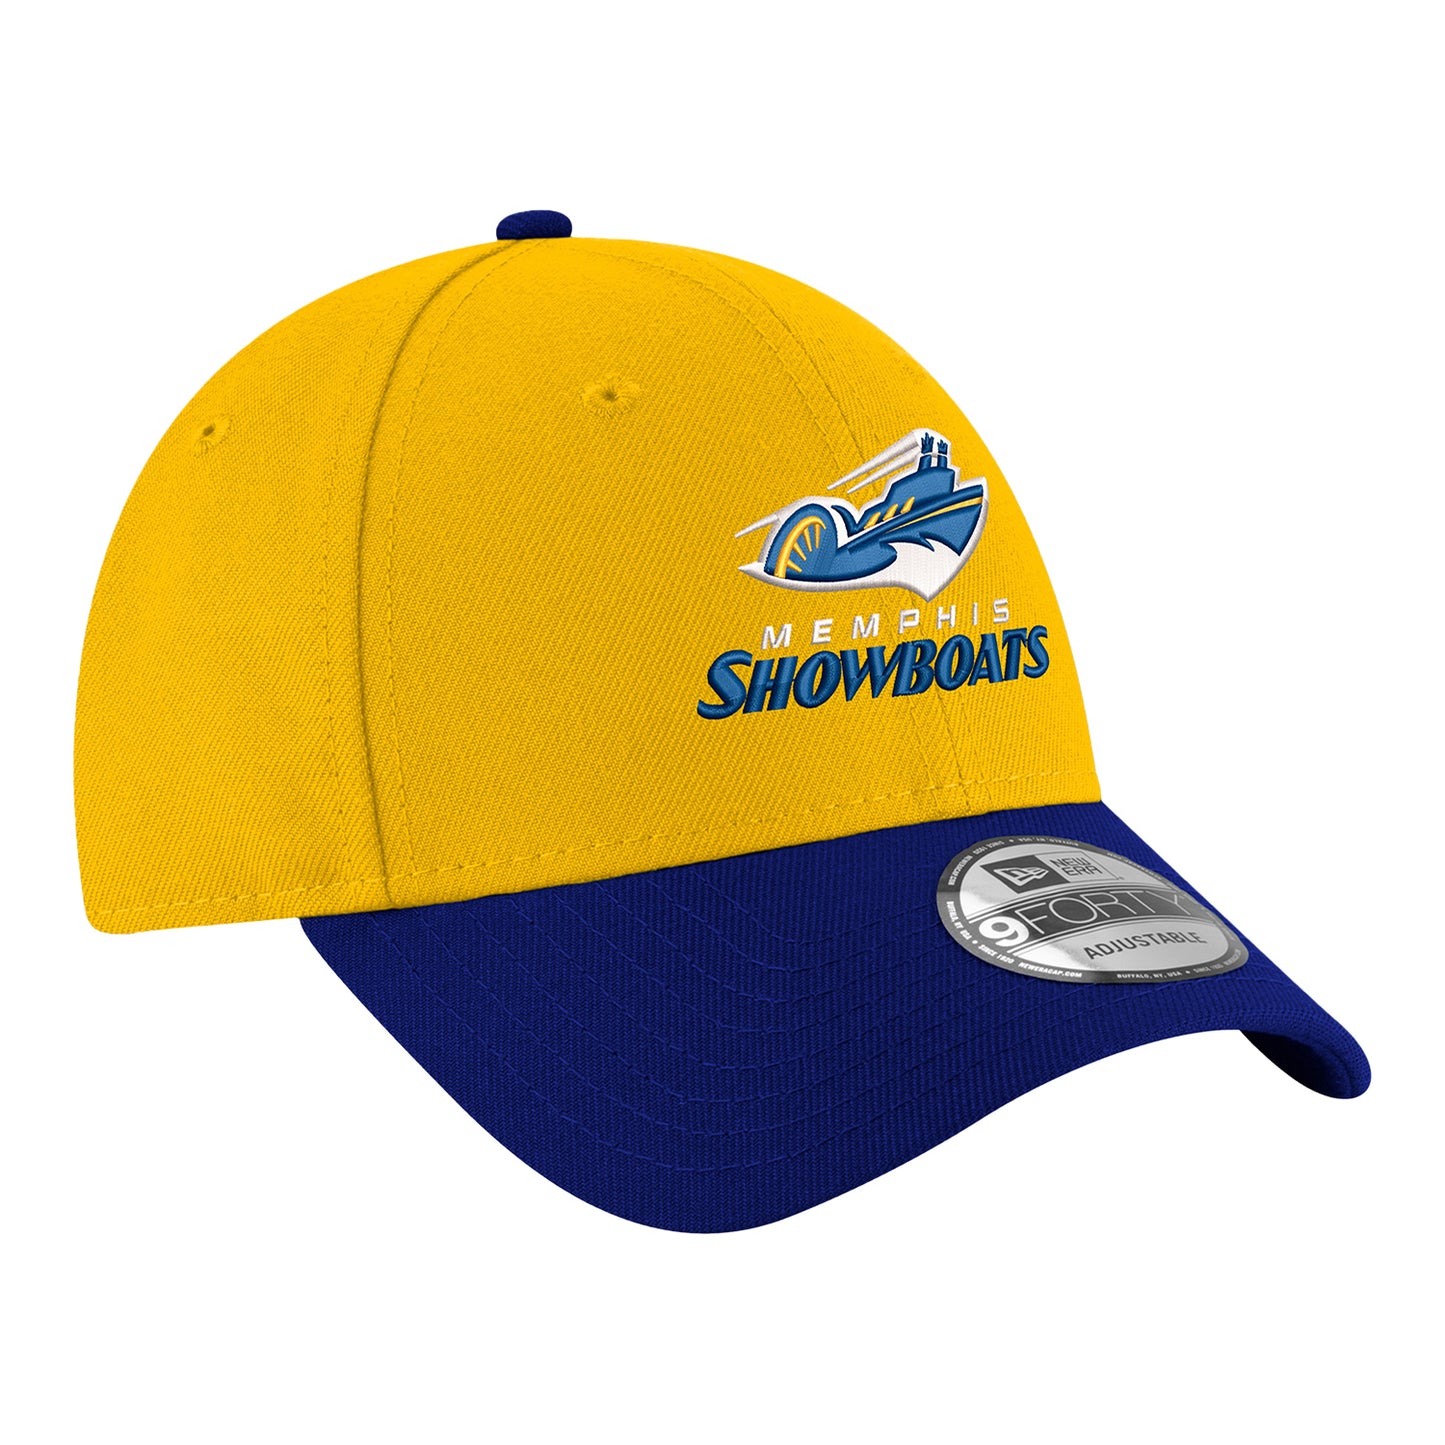 New Era Memphis Showboats 940 Stretch Snap Hat In Yellow - Front Right View